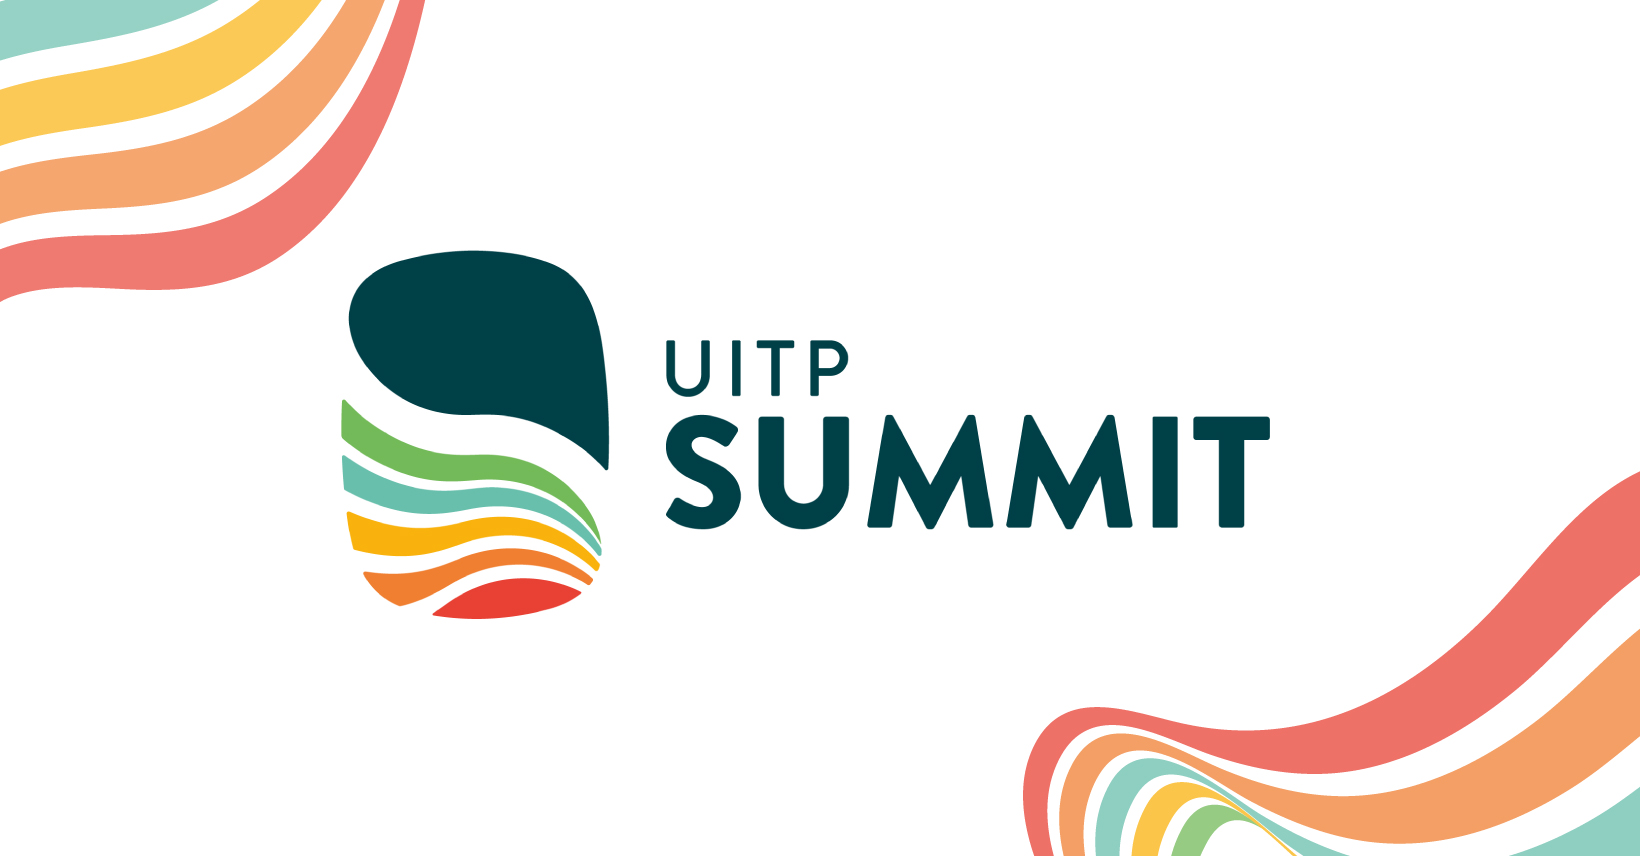 The UITP Summit, brought to you every year: Putting people at the heart of each annual edition